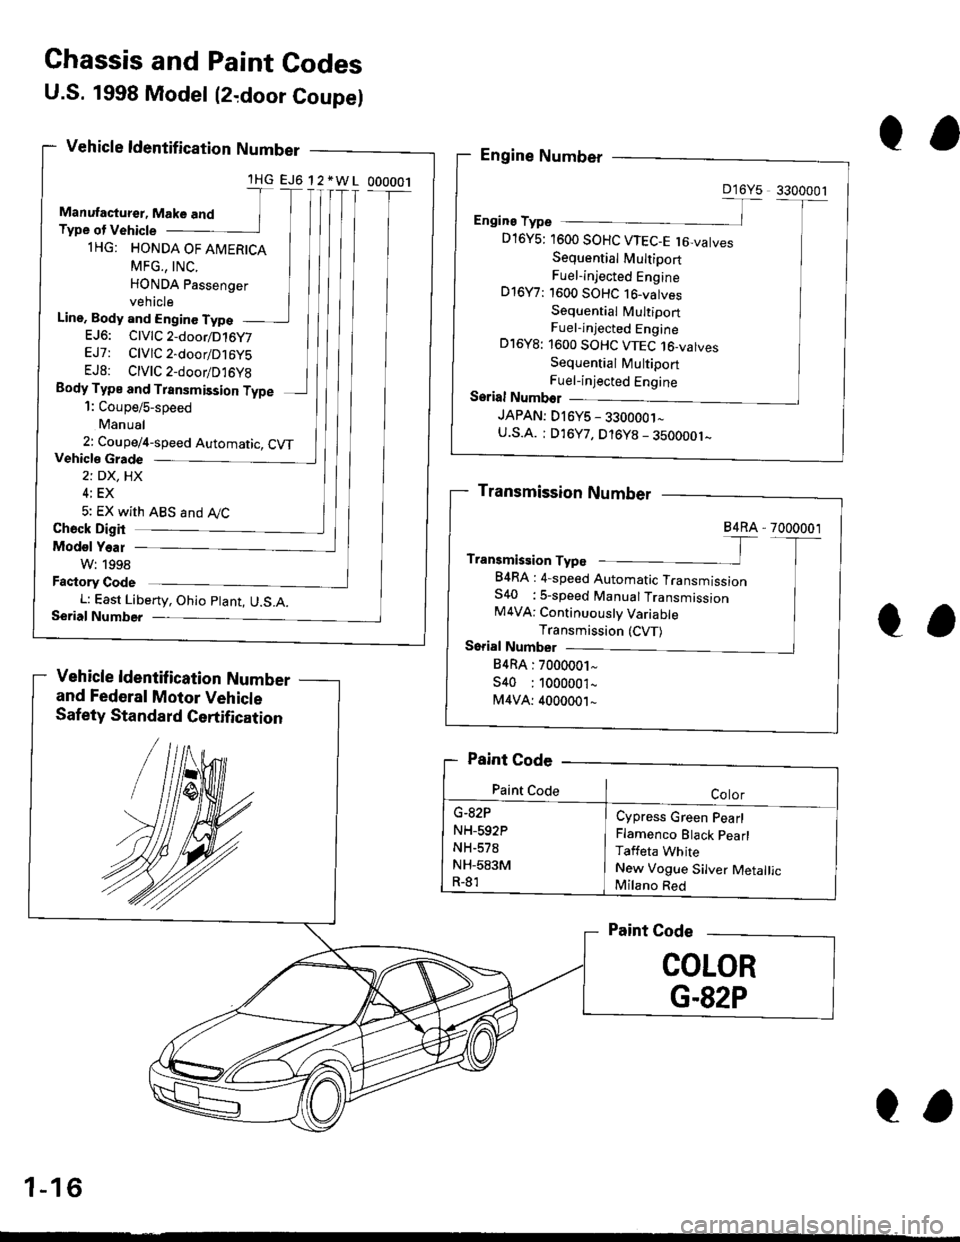 HONDA CIVIC 1996 6.G User Guide Ghassis and Paint Codes
U.S. 1998 Model (2,door Coupel
Vehicle ldentif ication Number
and Federal Motor Vehicle
Safety Standard Certification
lHG EJ6 12*WL 000001
Line, Body and Enginc TypeEJ6: ClVlC2